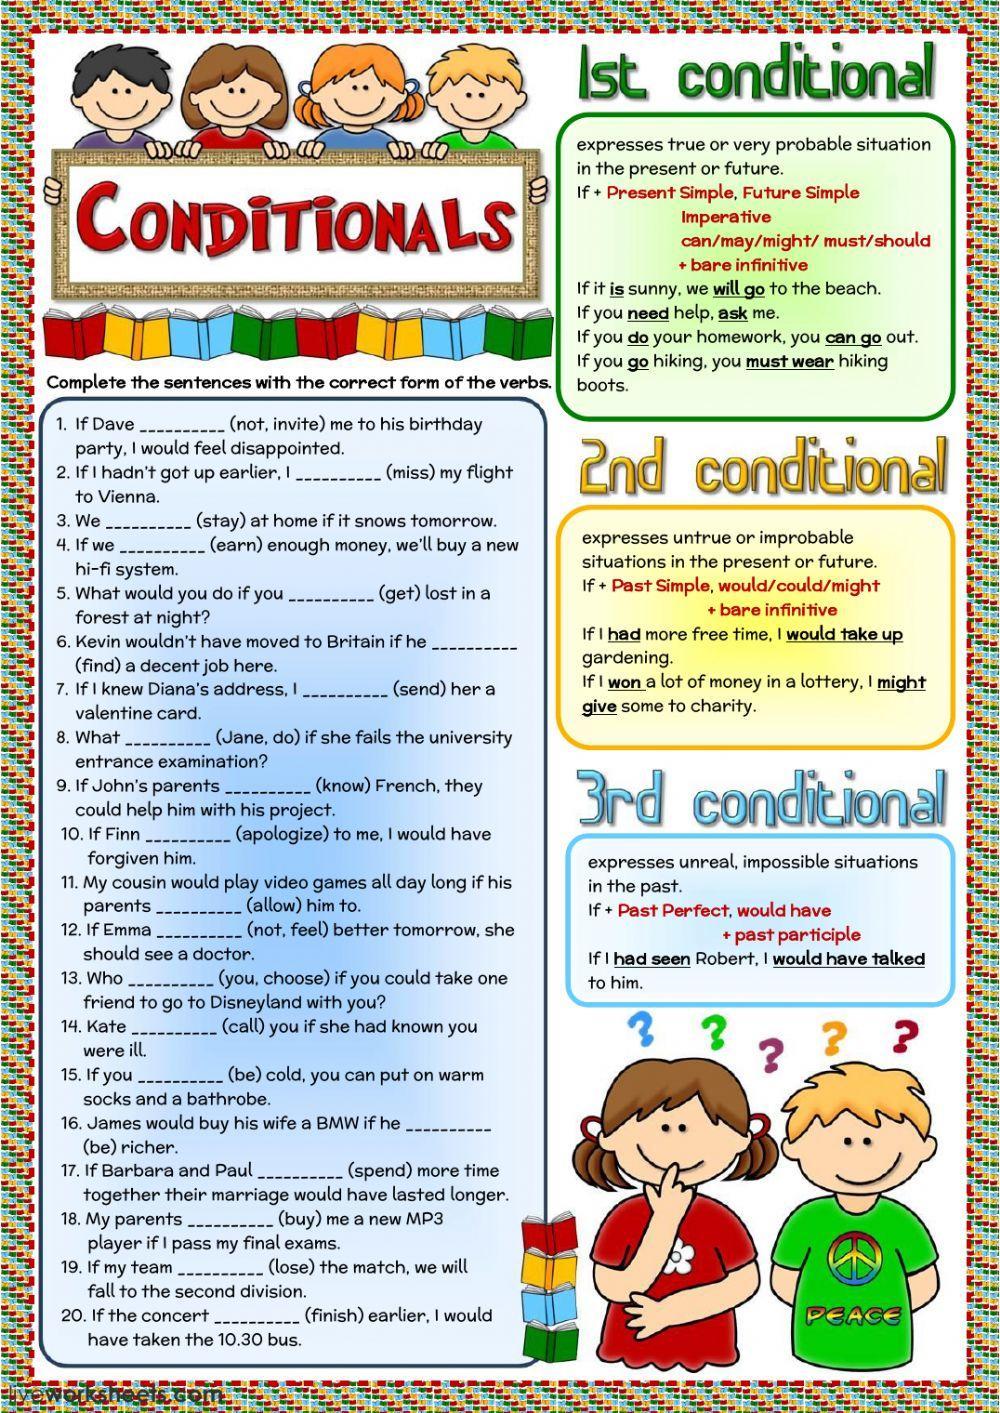 Conditionals - revision